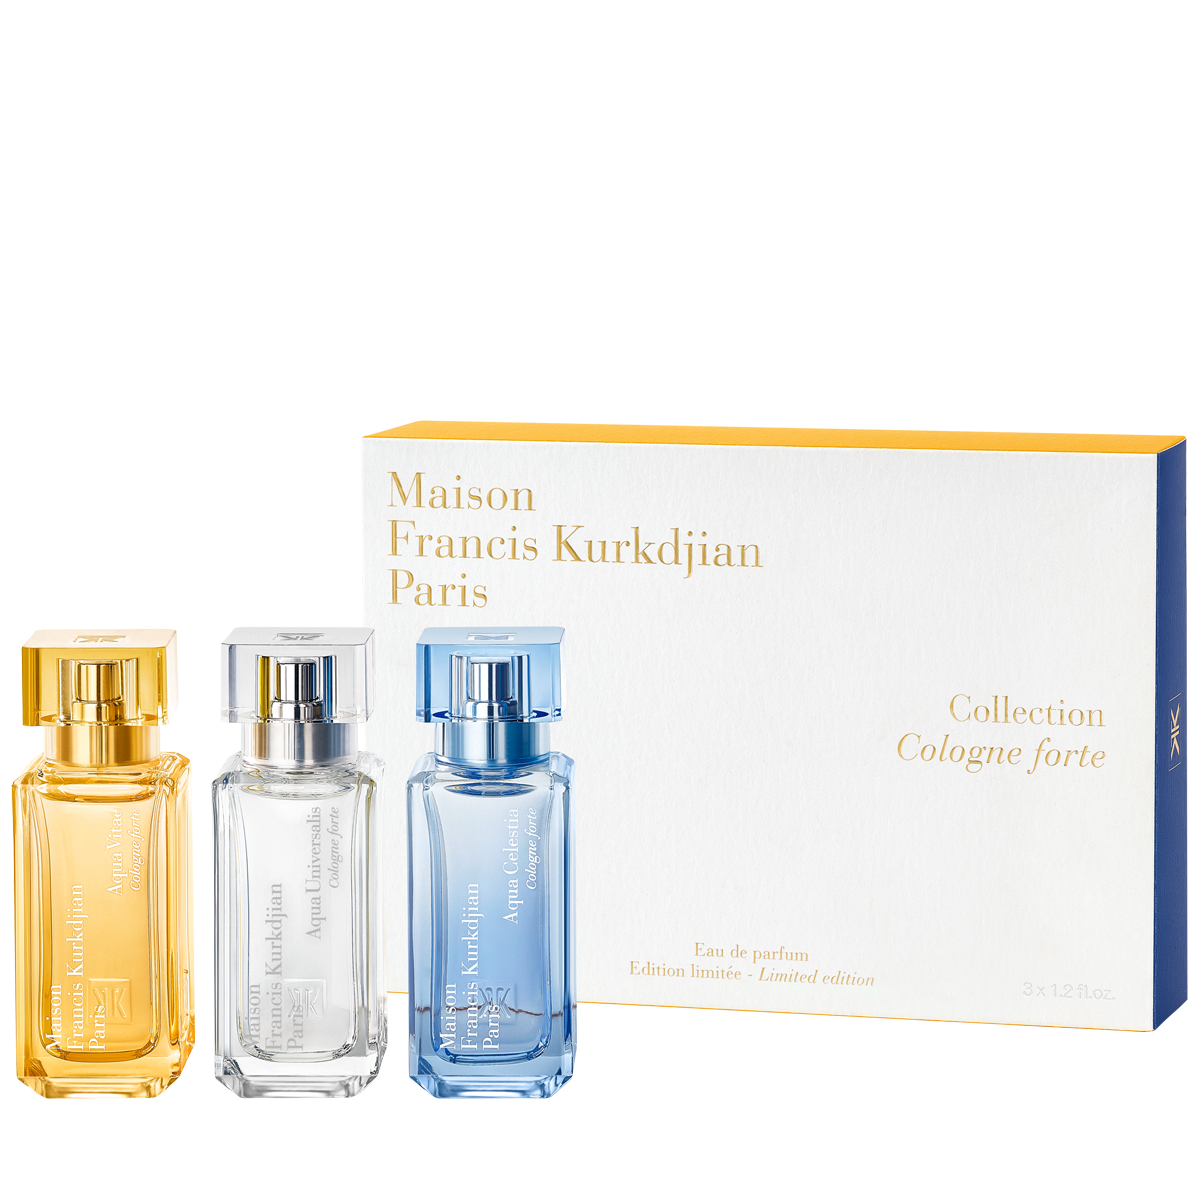 Cologne forte collection